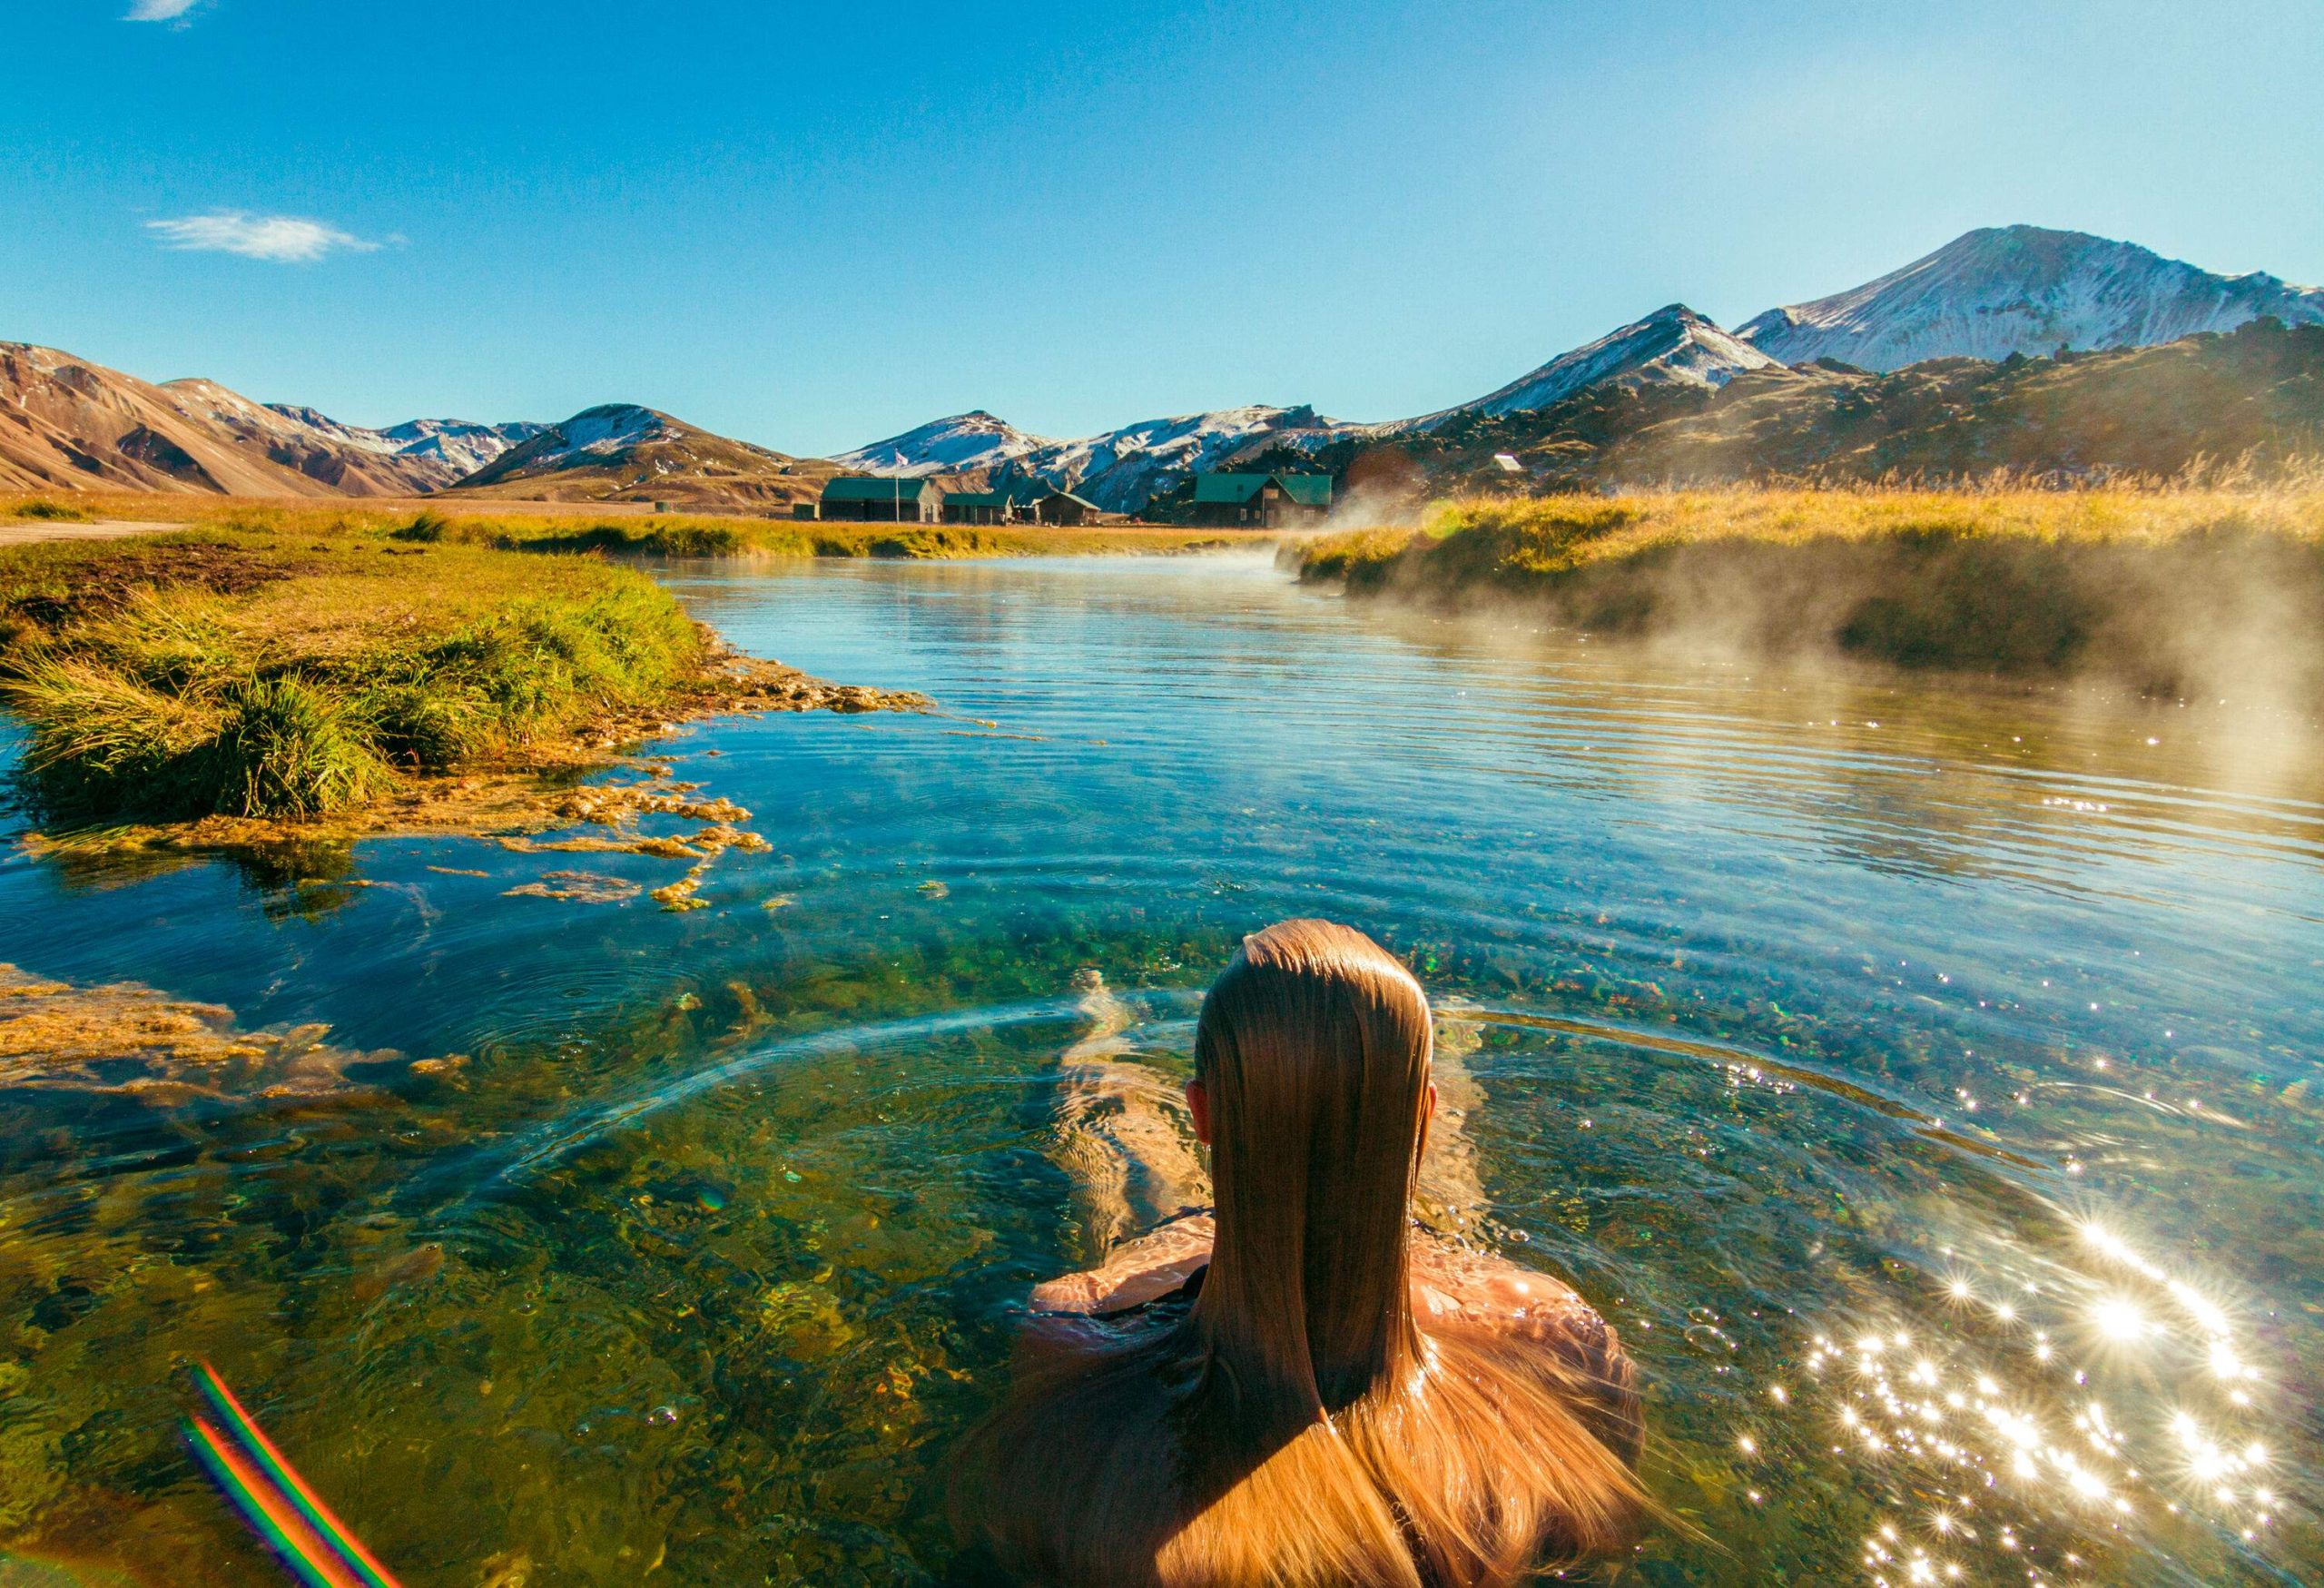 A woman with long blonde hair immersed in a shallow, clear, and steaming hot spring.